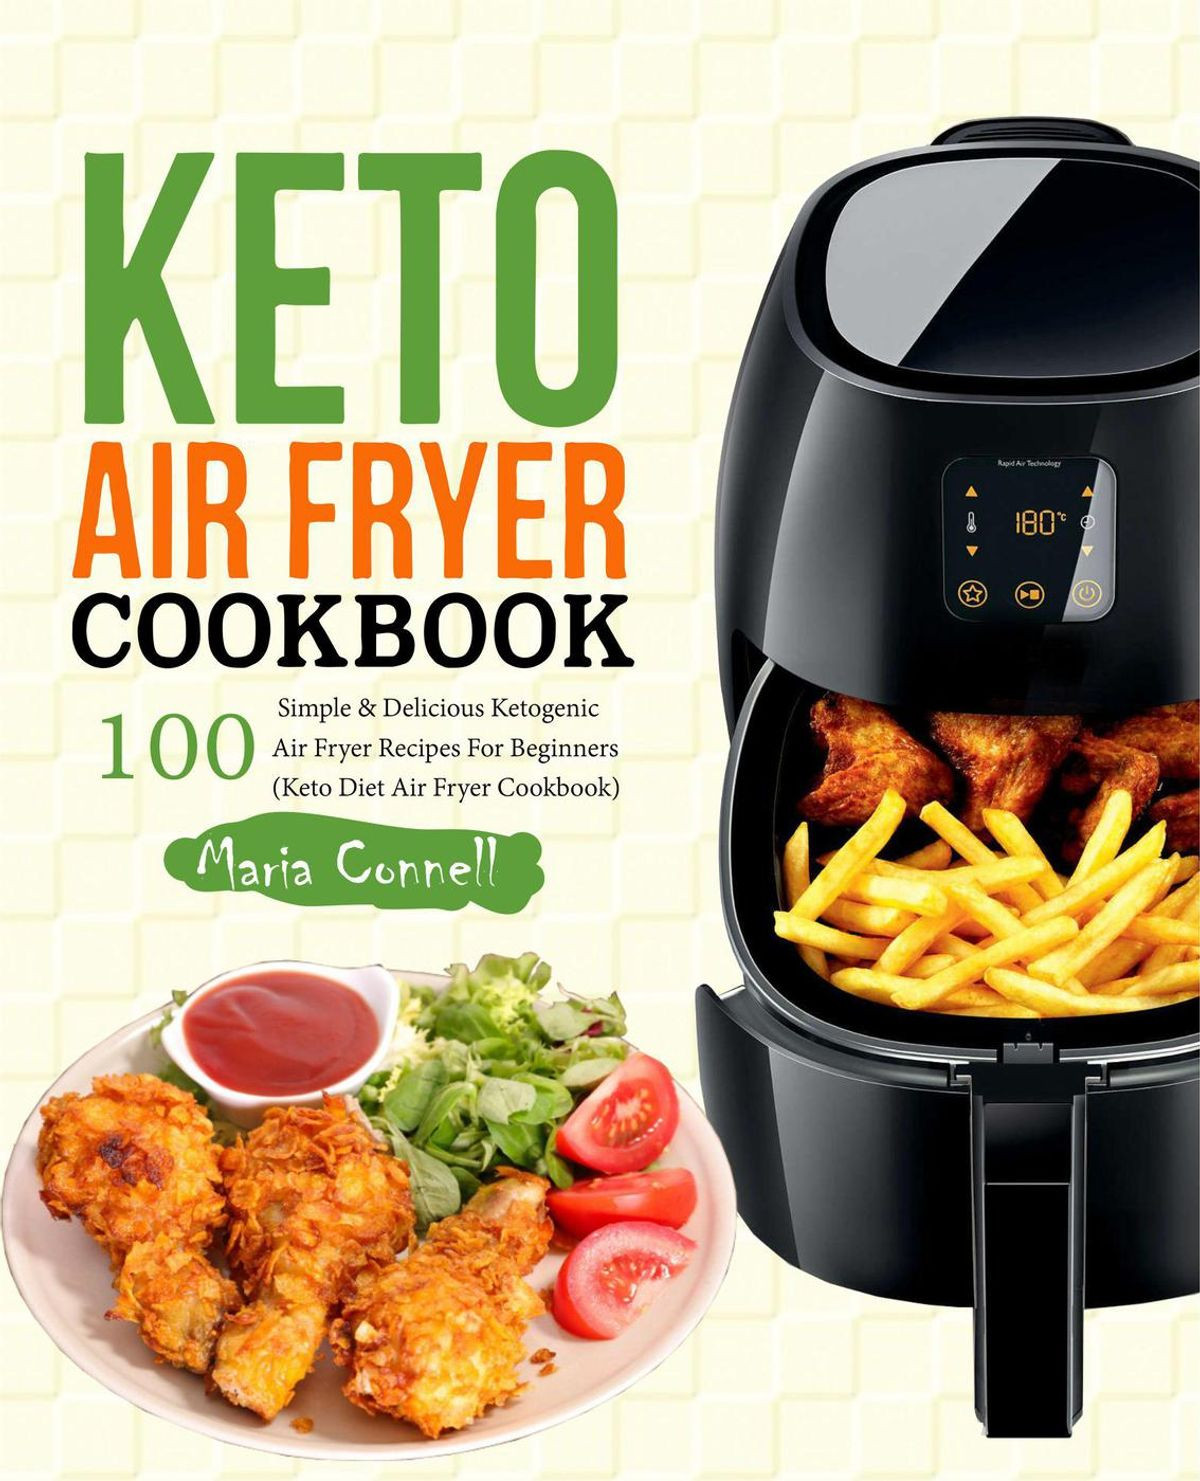 Keto Diet For Beginners Recipe
 Keto Air Fryer Cookbook 100 Simple & Delicious Ketogenic